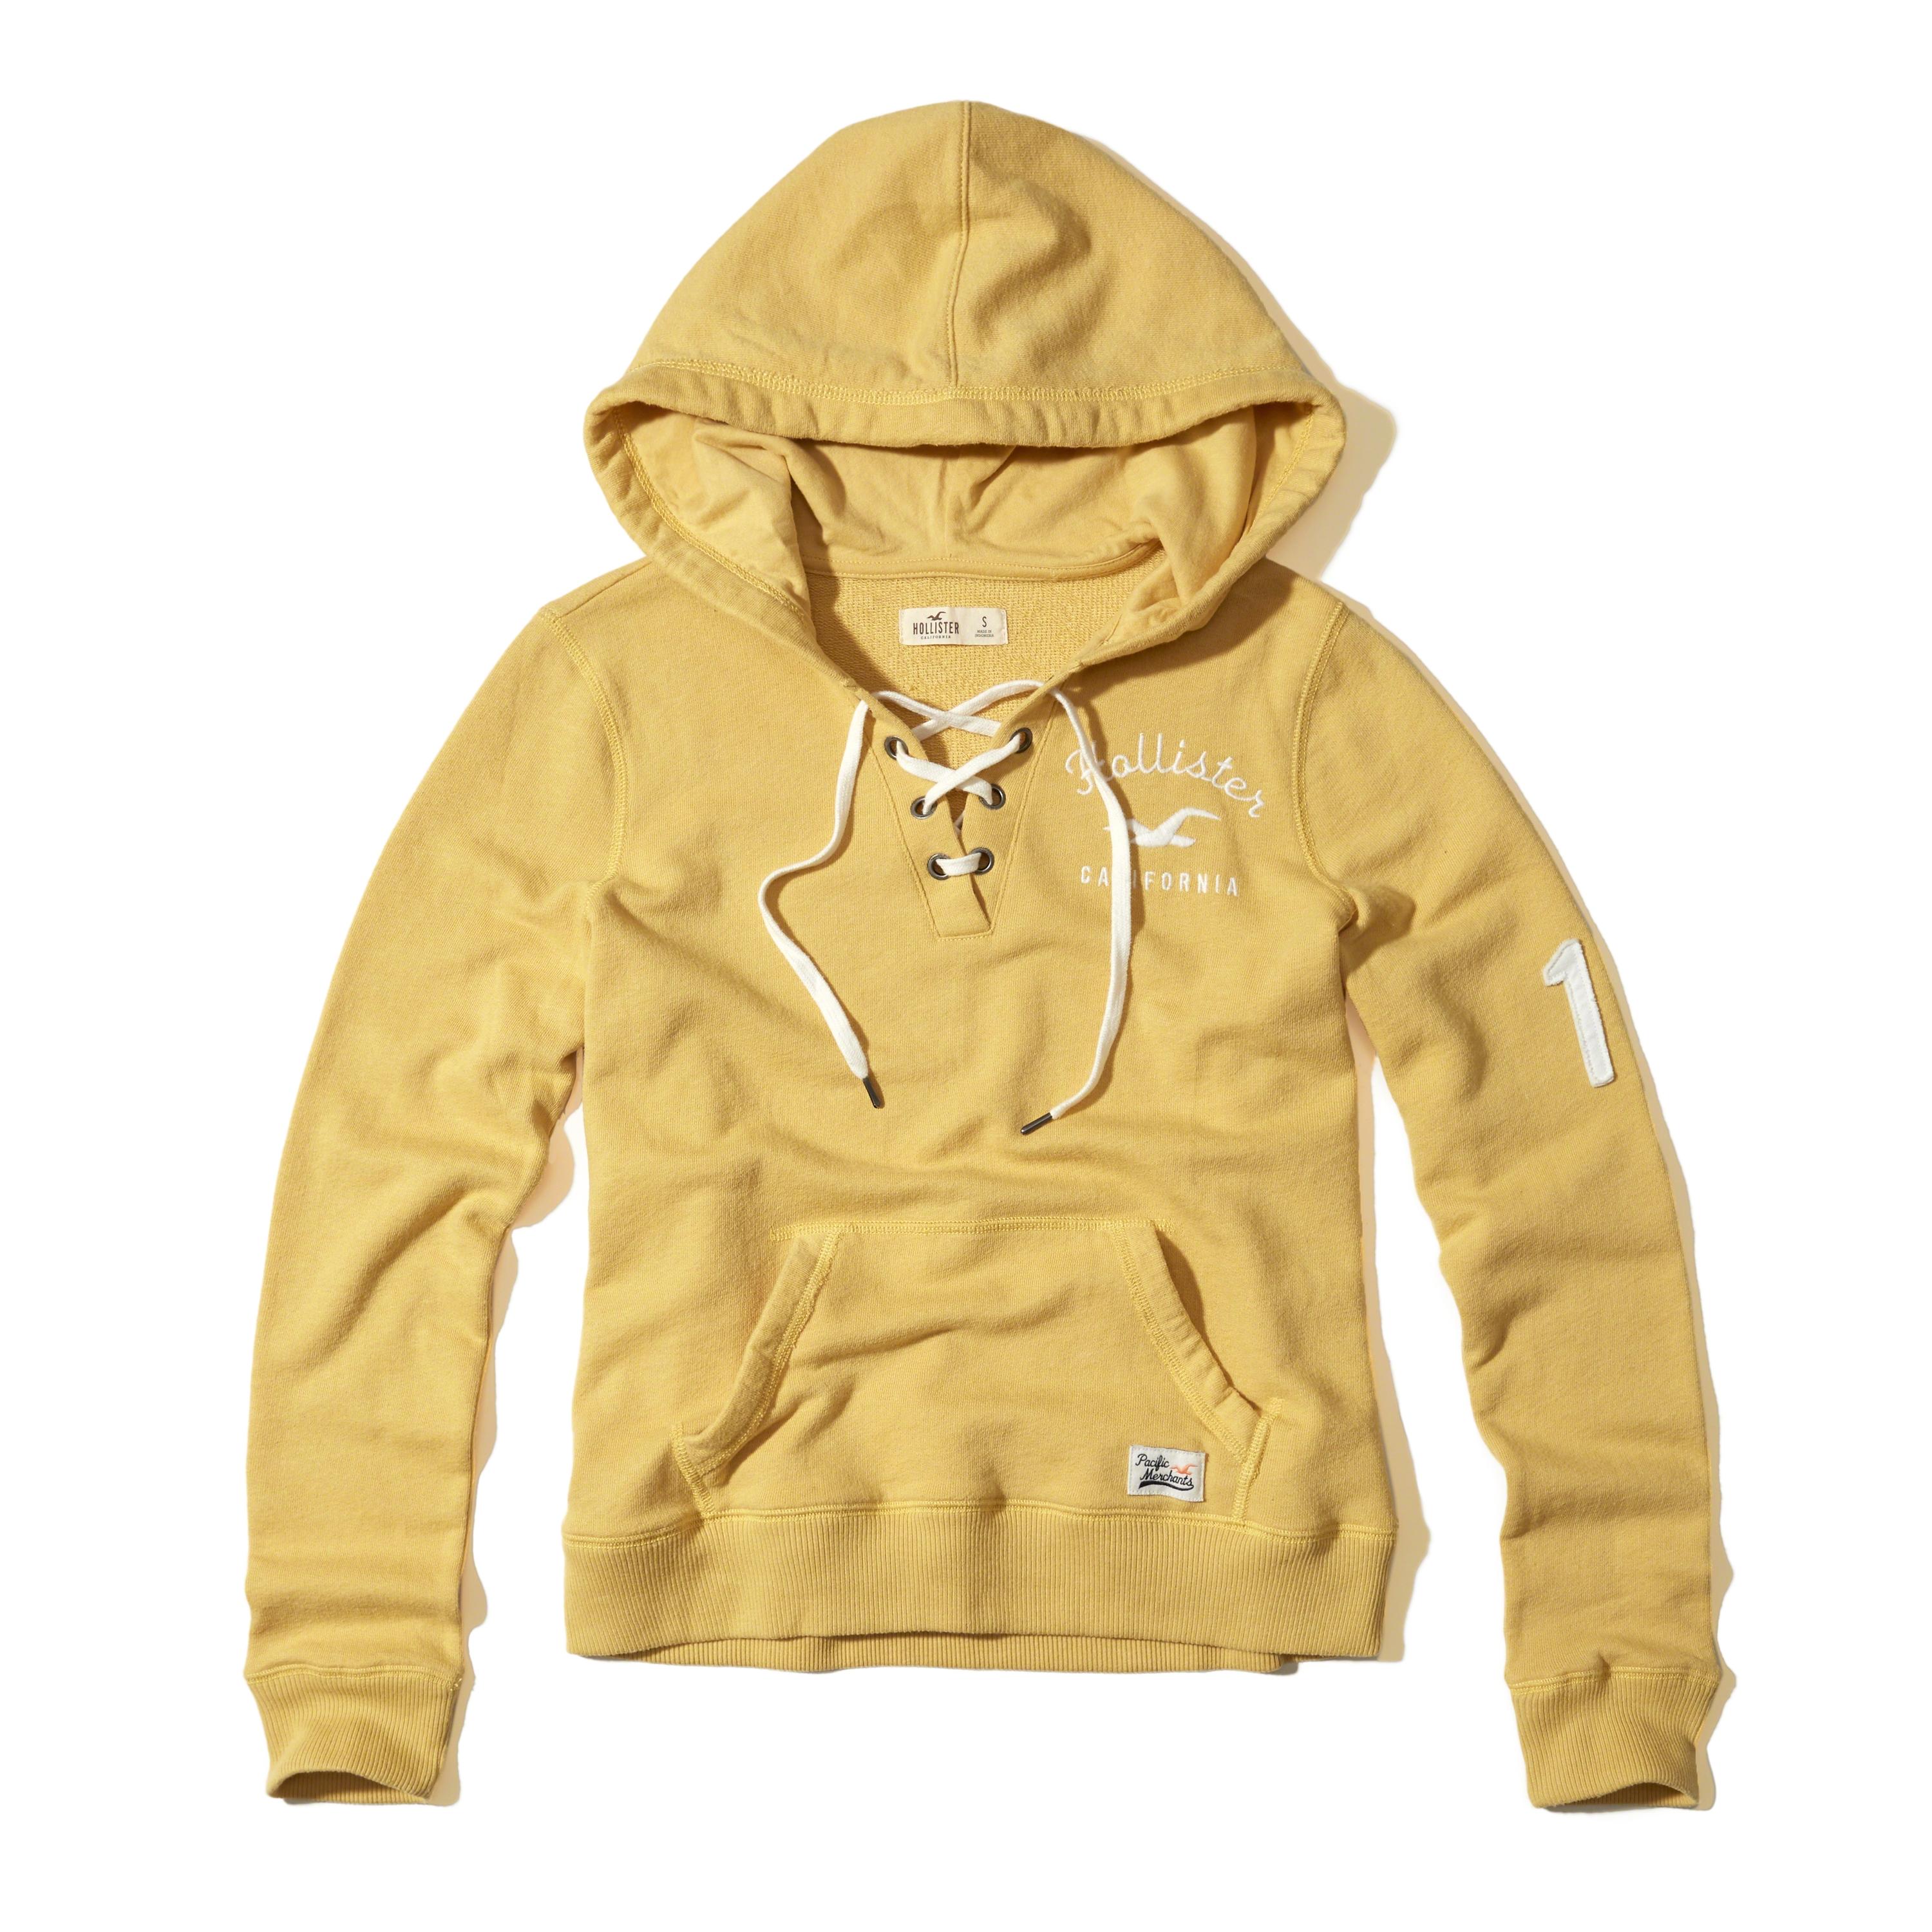 Lyst - Hollister Lace-up Graphic Hoodie in Yellow